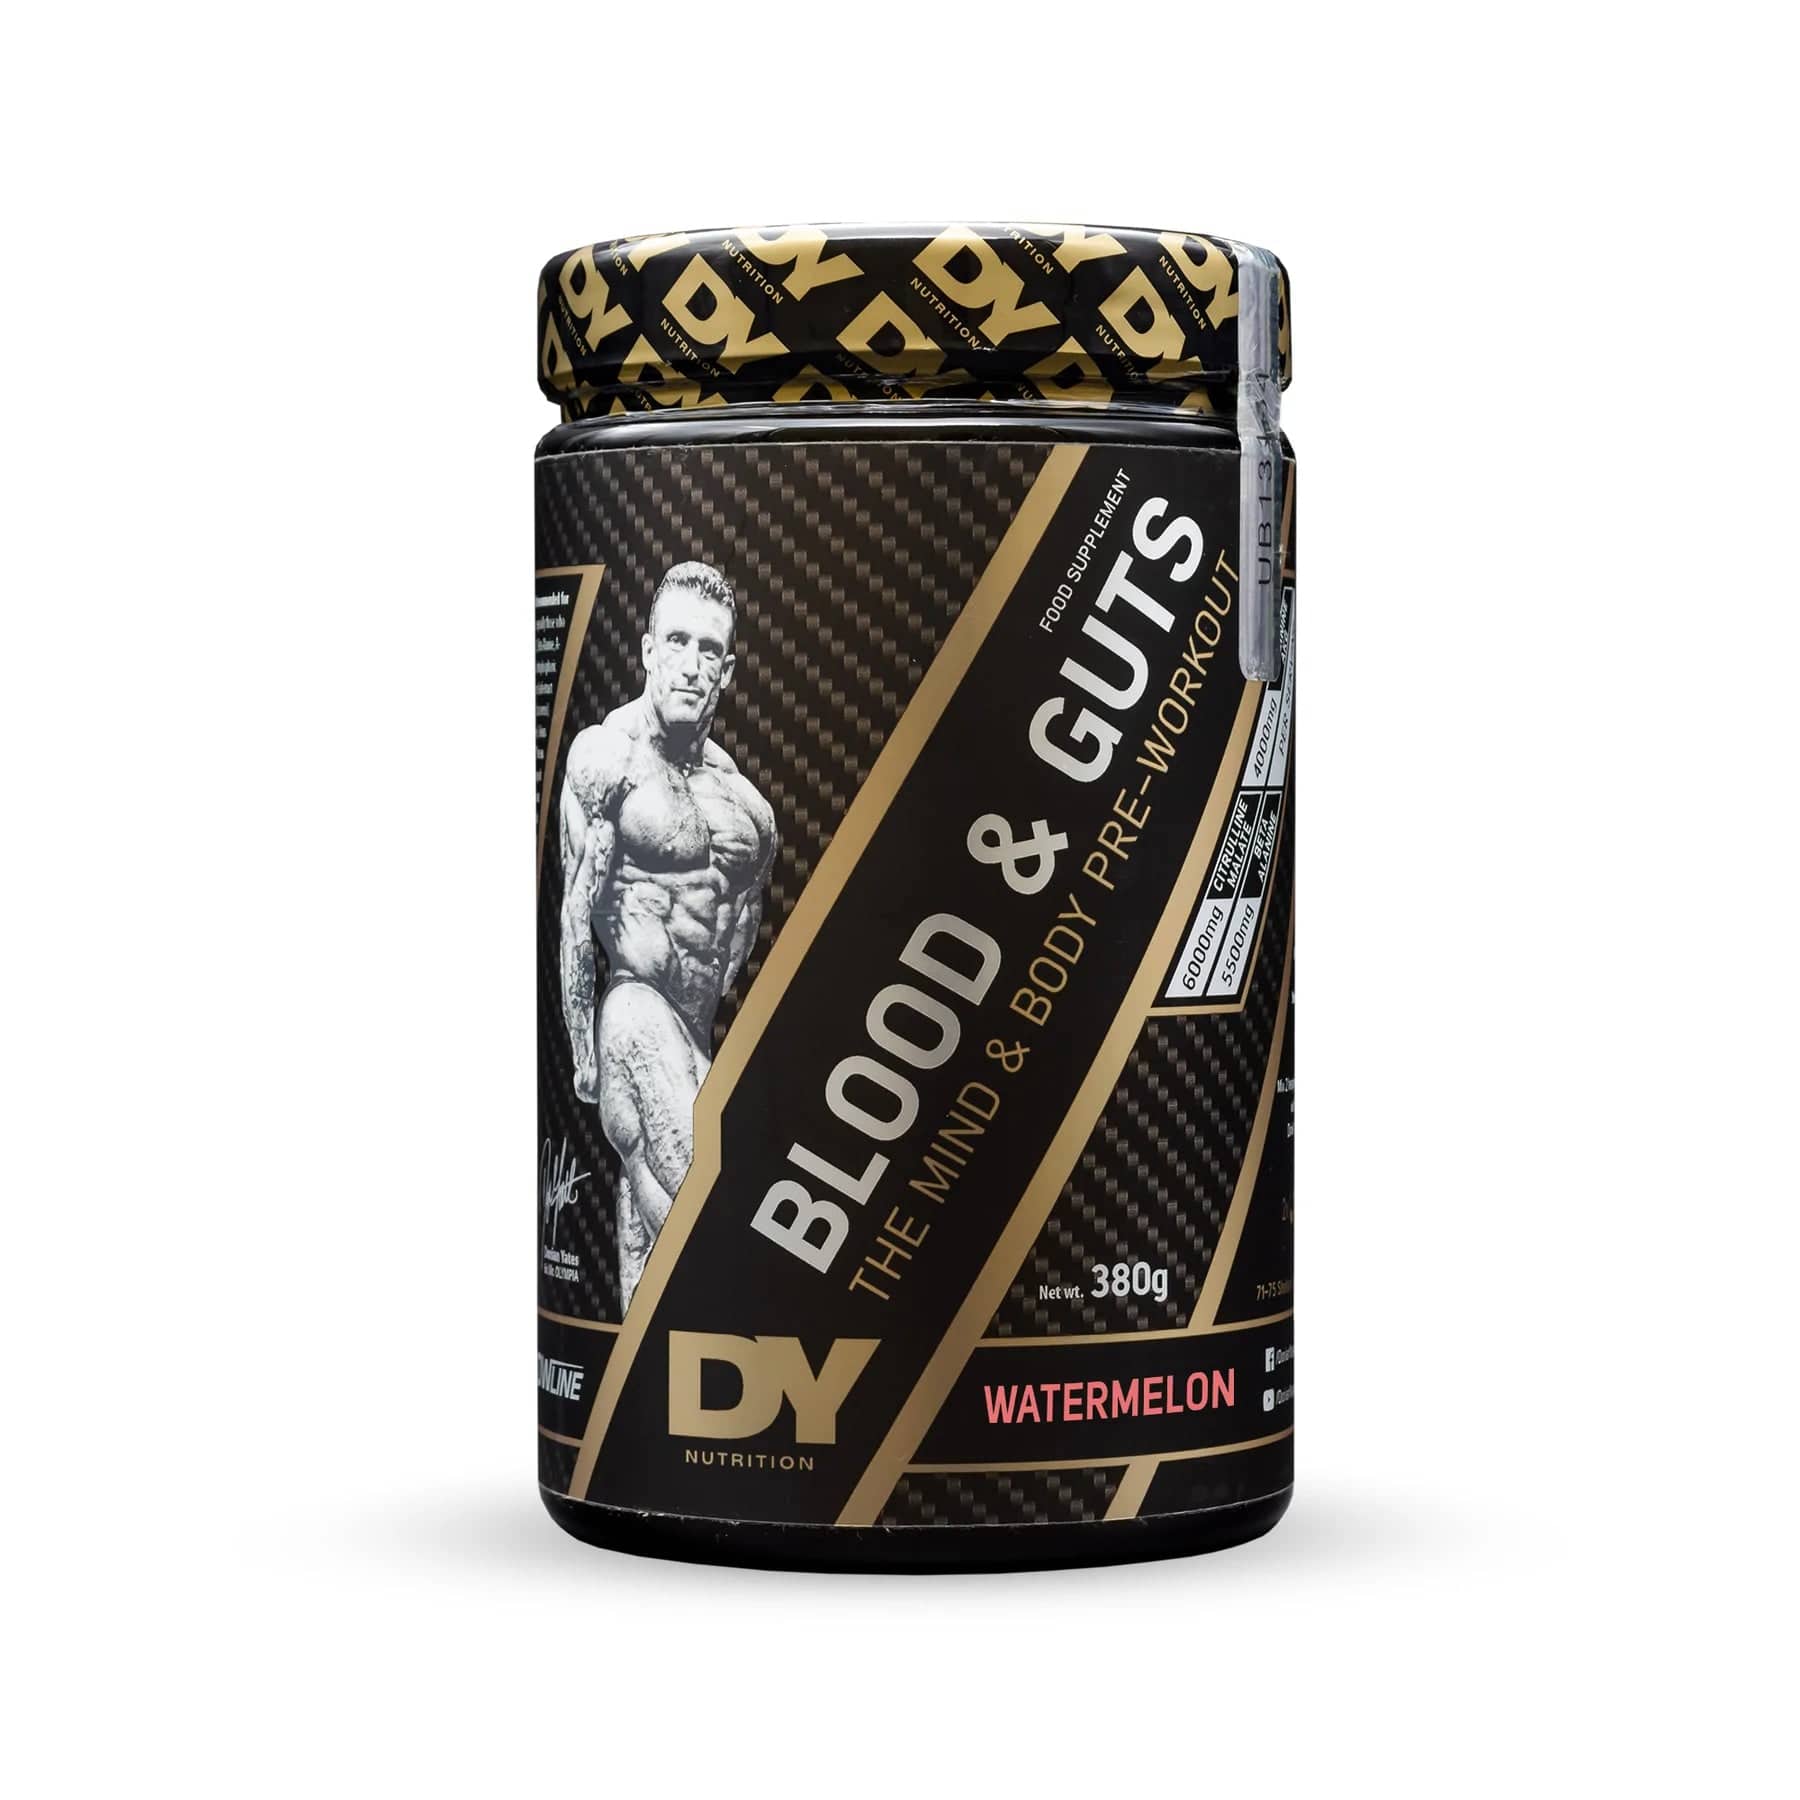 DY NutritionBlood & Guts Pre-WorkoutPre-WorkoutRED SUPPS